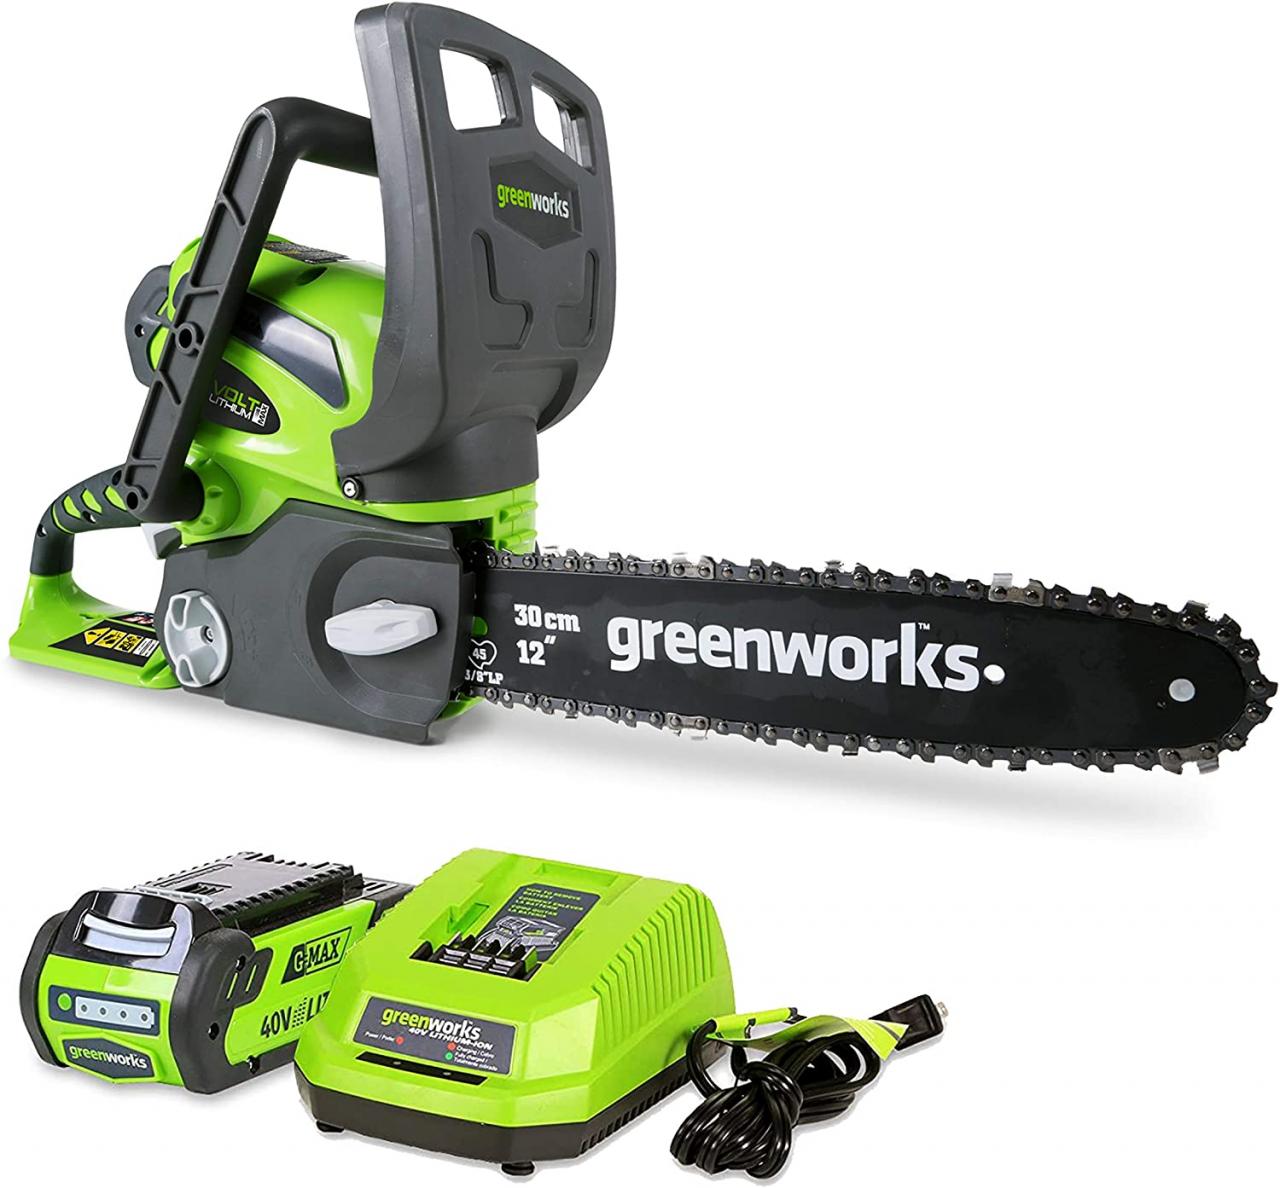 Greenworks 12-Inch 40V Cordless Chainsaw, 2.0 AH Battery Included 20262  #loghomeplans | Greenworks, Cordless chainsaw, Chainsaw